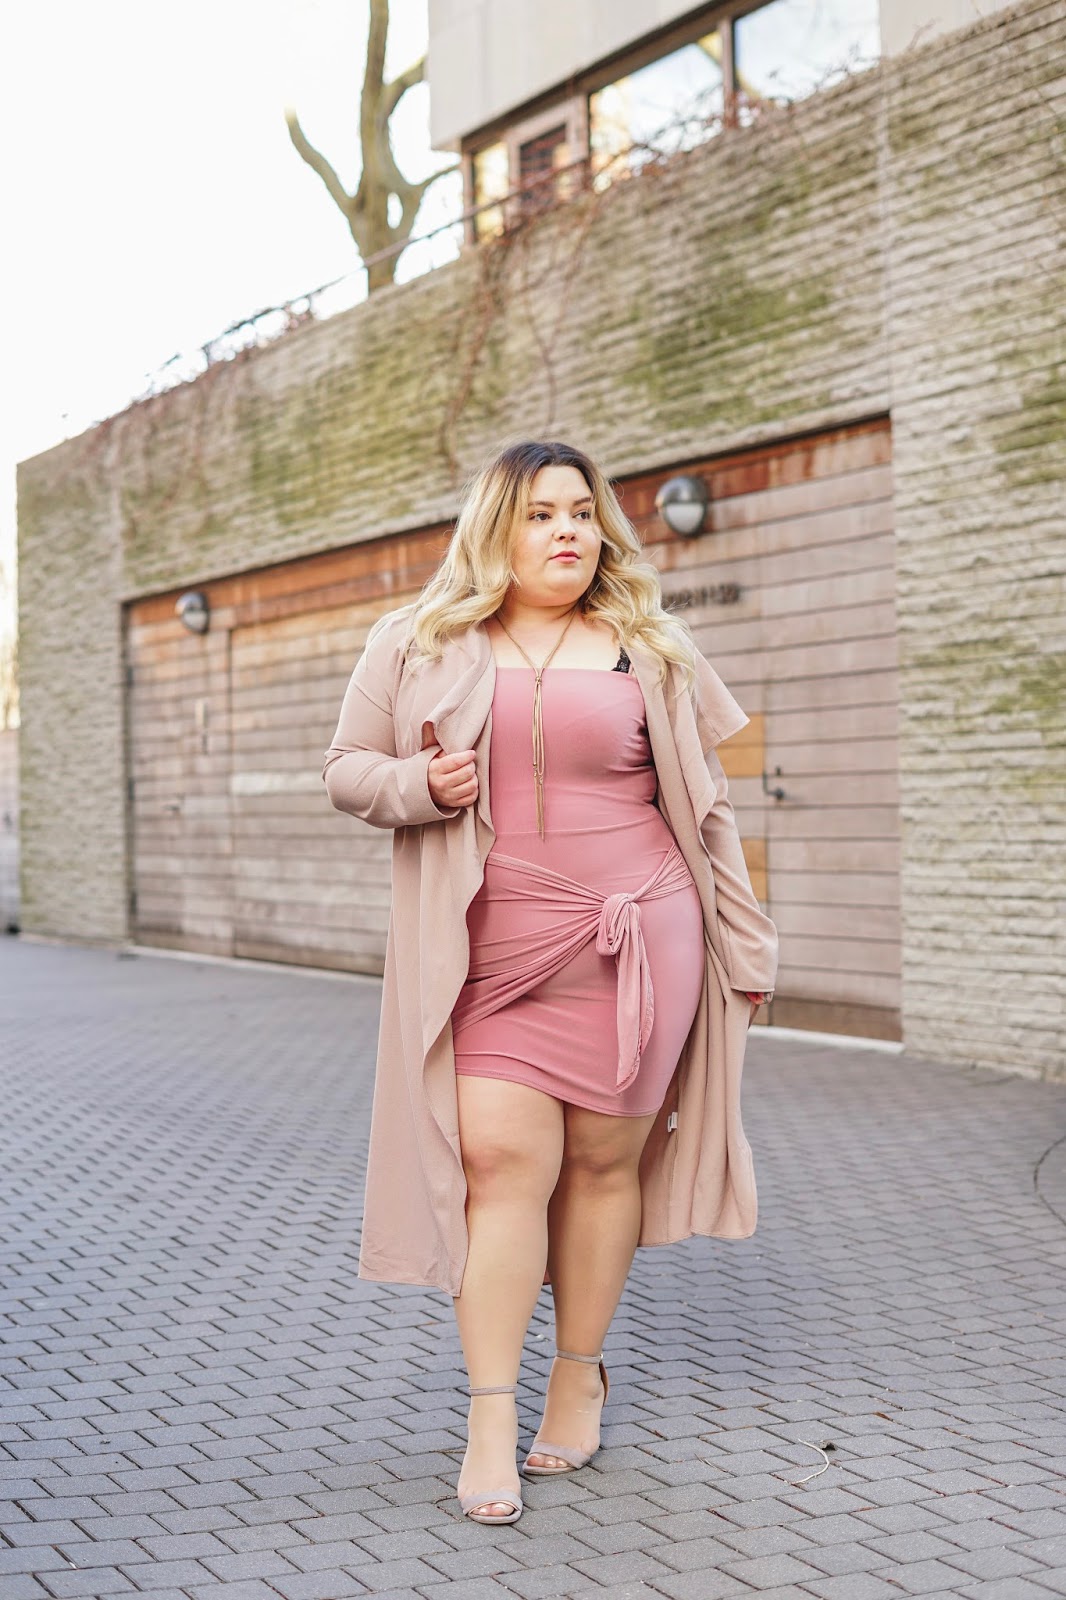 natalie Craig, natalie in the city, Chicago fashion blogger, plus size fashion blogger, Chicago model, petite plus size fashion, petite plus size model, chi town, affordable plus size fashion, curvy girls, fashion nova curve, fashion nova, mauve, plus size mini dress, trench coat, sexy plus size fashion, size 16, size 18